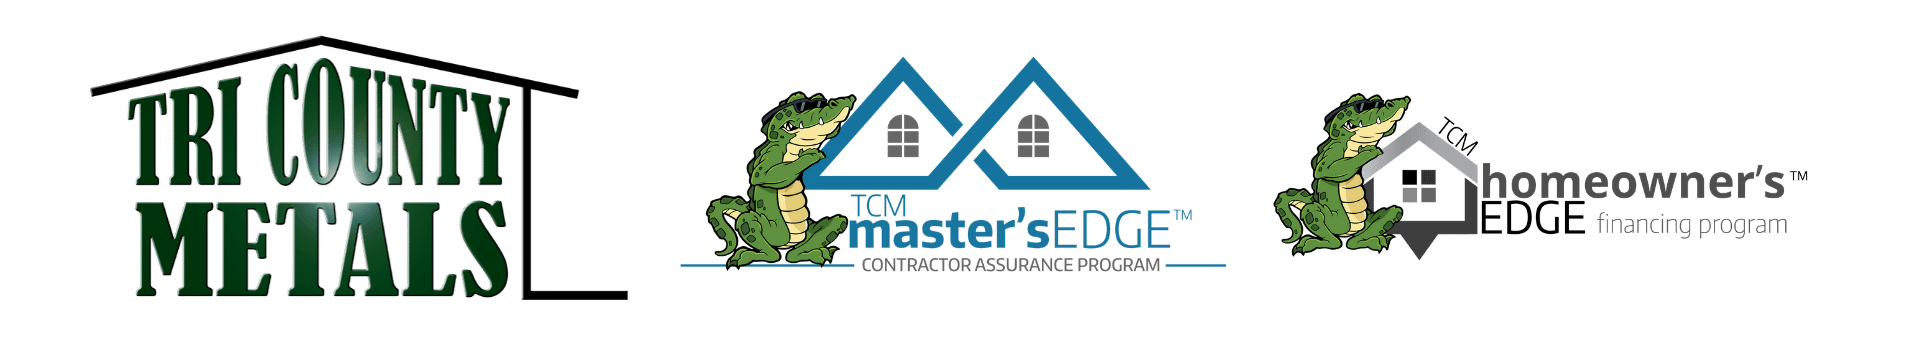 Trio of logos for TriCounty Metals for their MastersEdge Metal Roofing and the HomeownersEdge financing program.